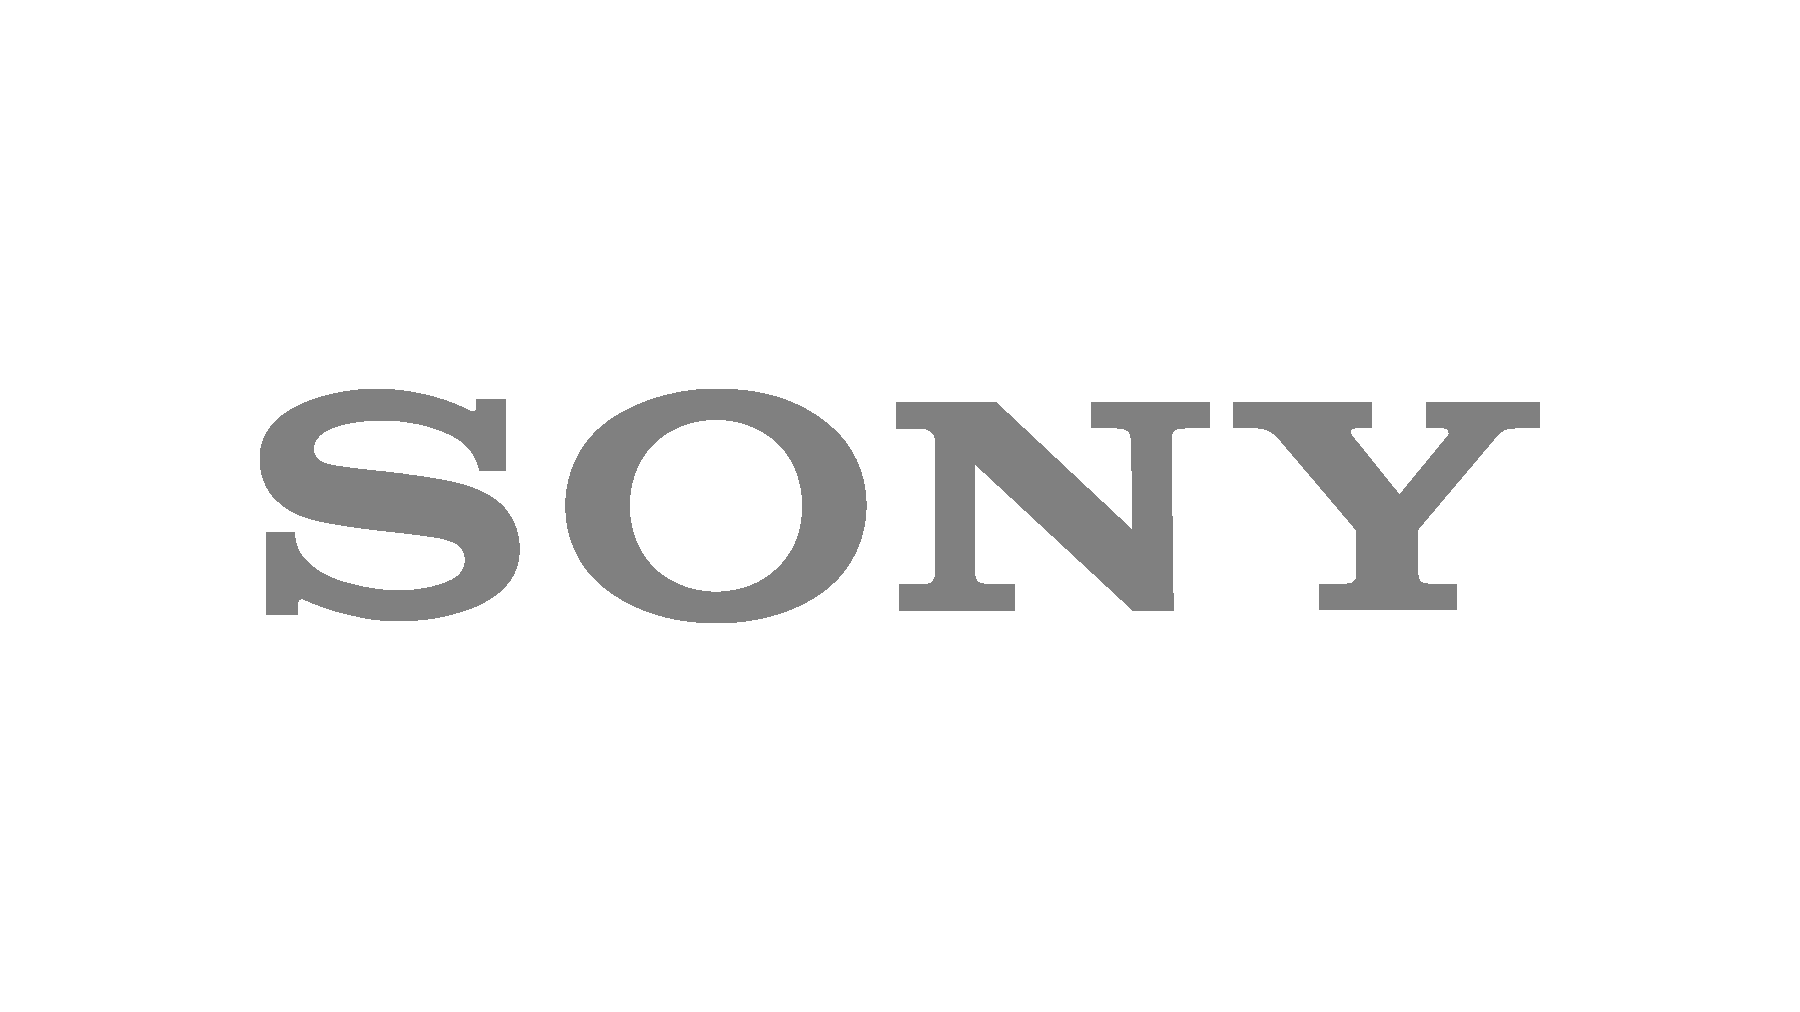 SONY square.png